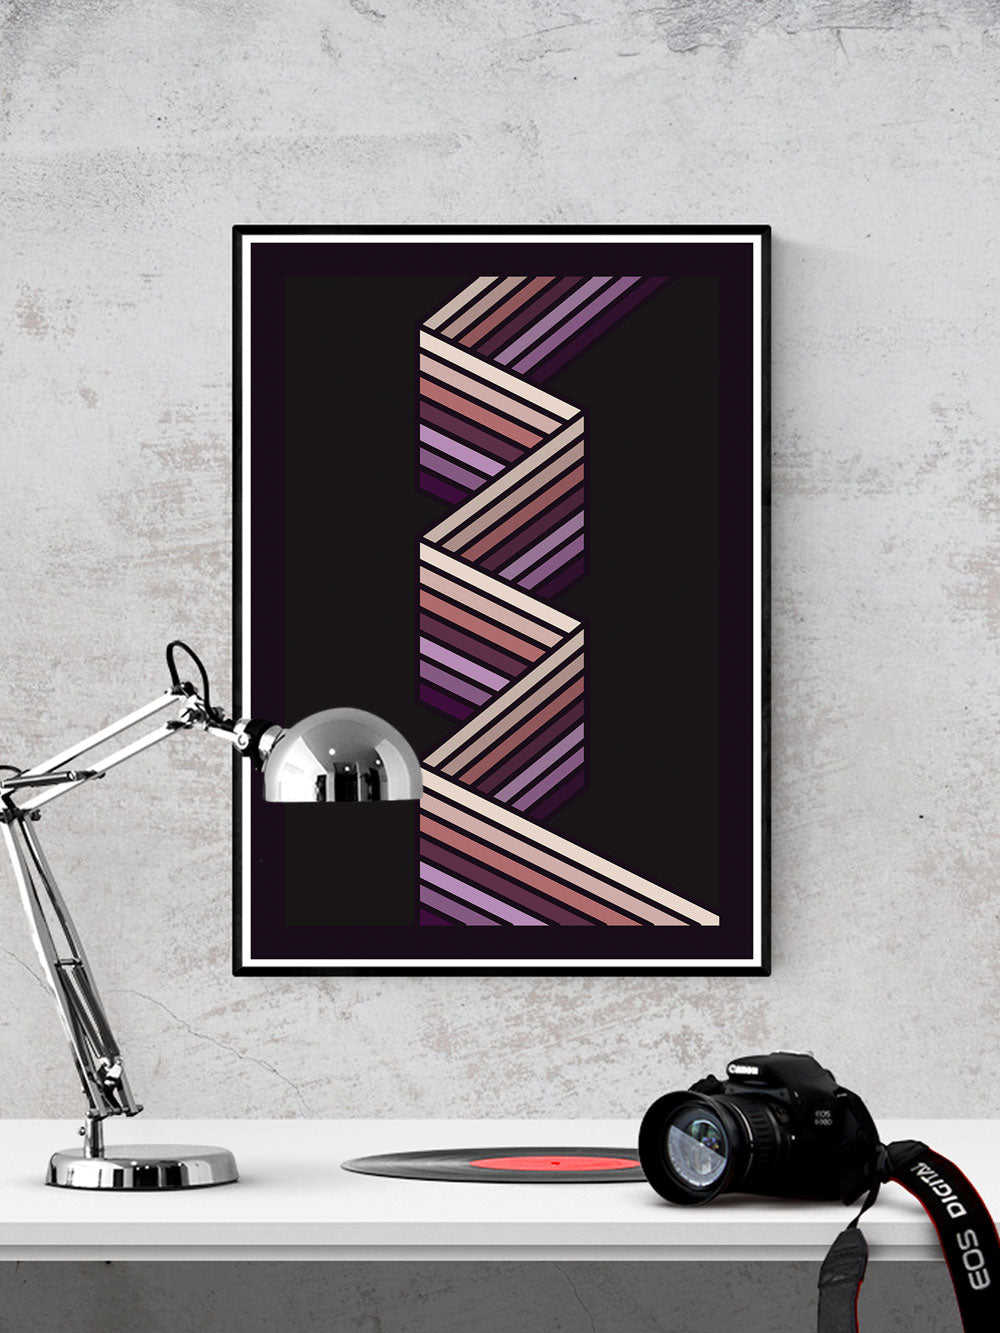 The Contamination Zig Zag Print in a frame on a wall